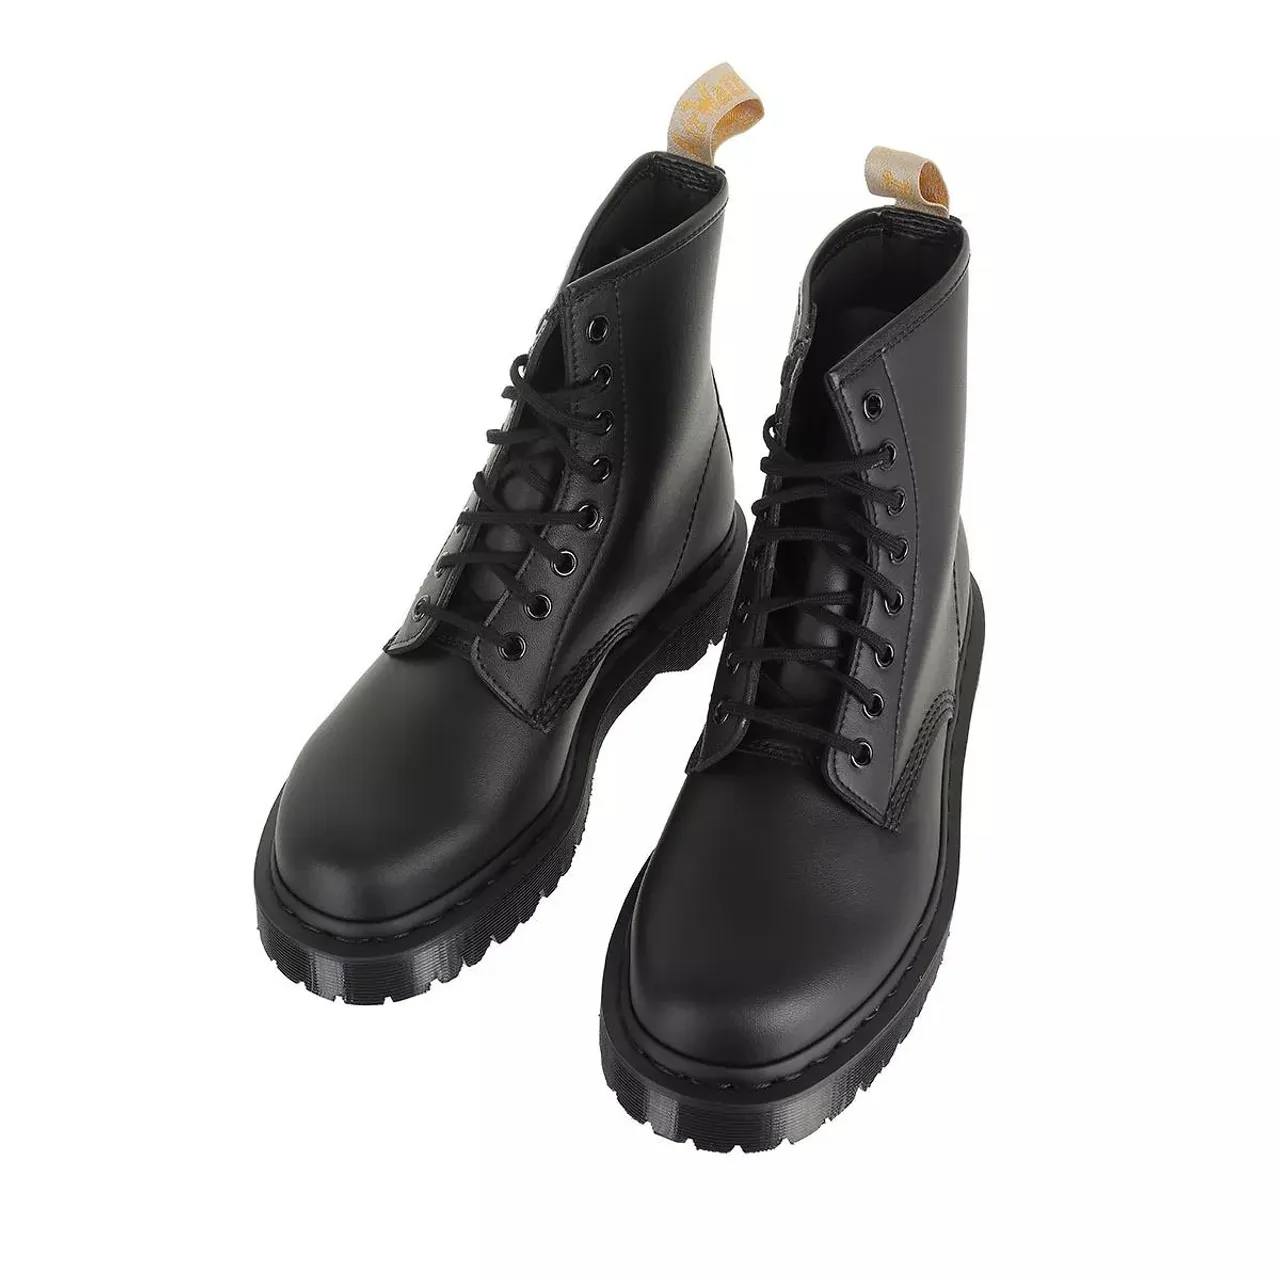 Dr. Martens Boots & Ankle Boots - Vegan 1460 Bex Mono - black - Boots & Ankle Boots for ladies